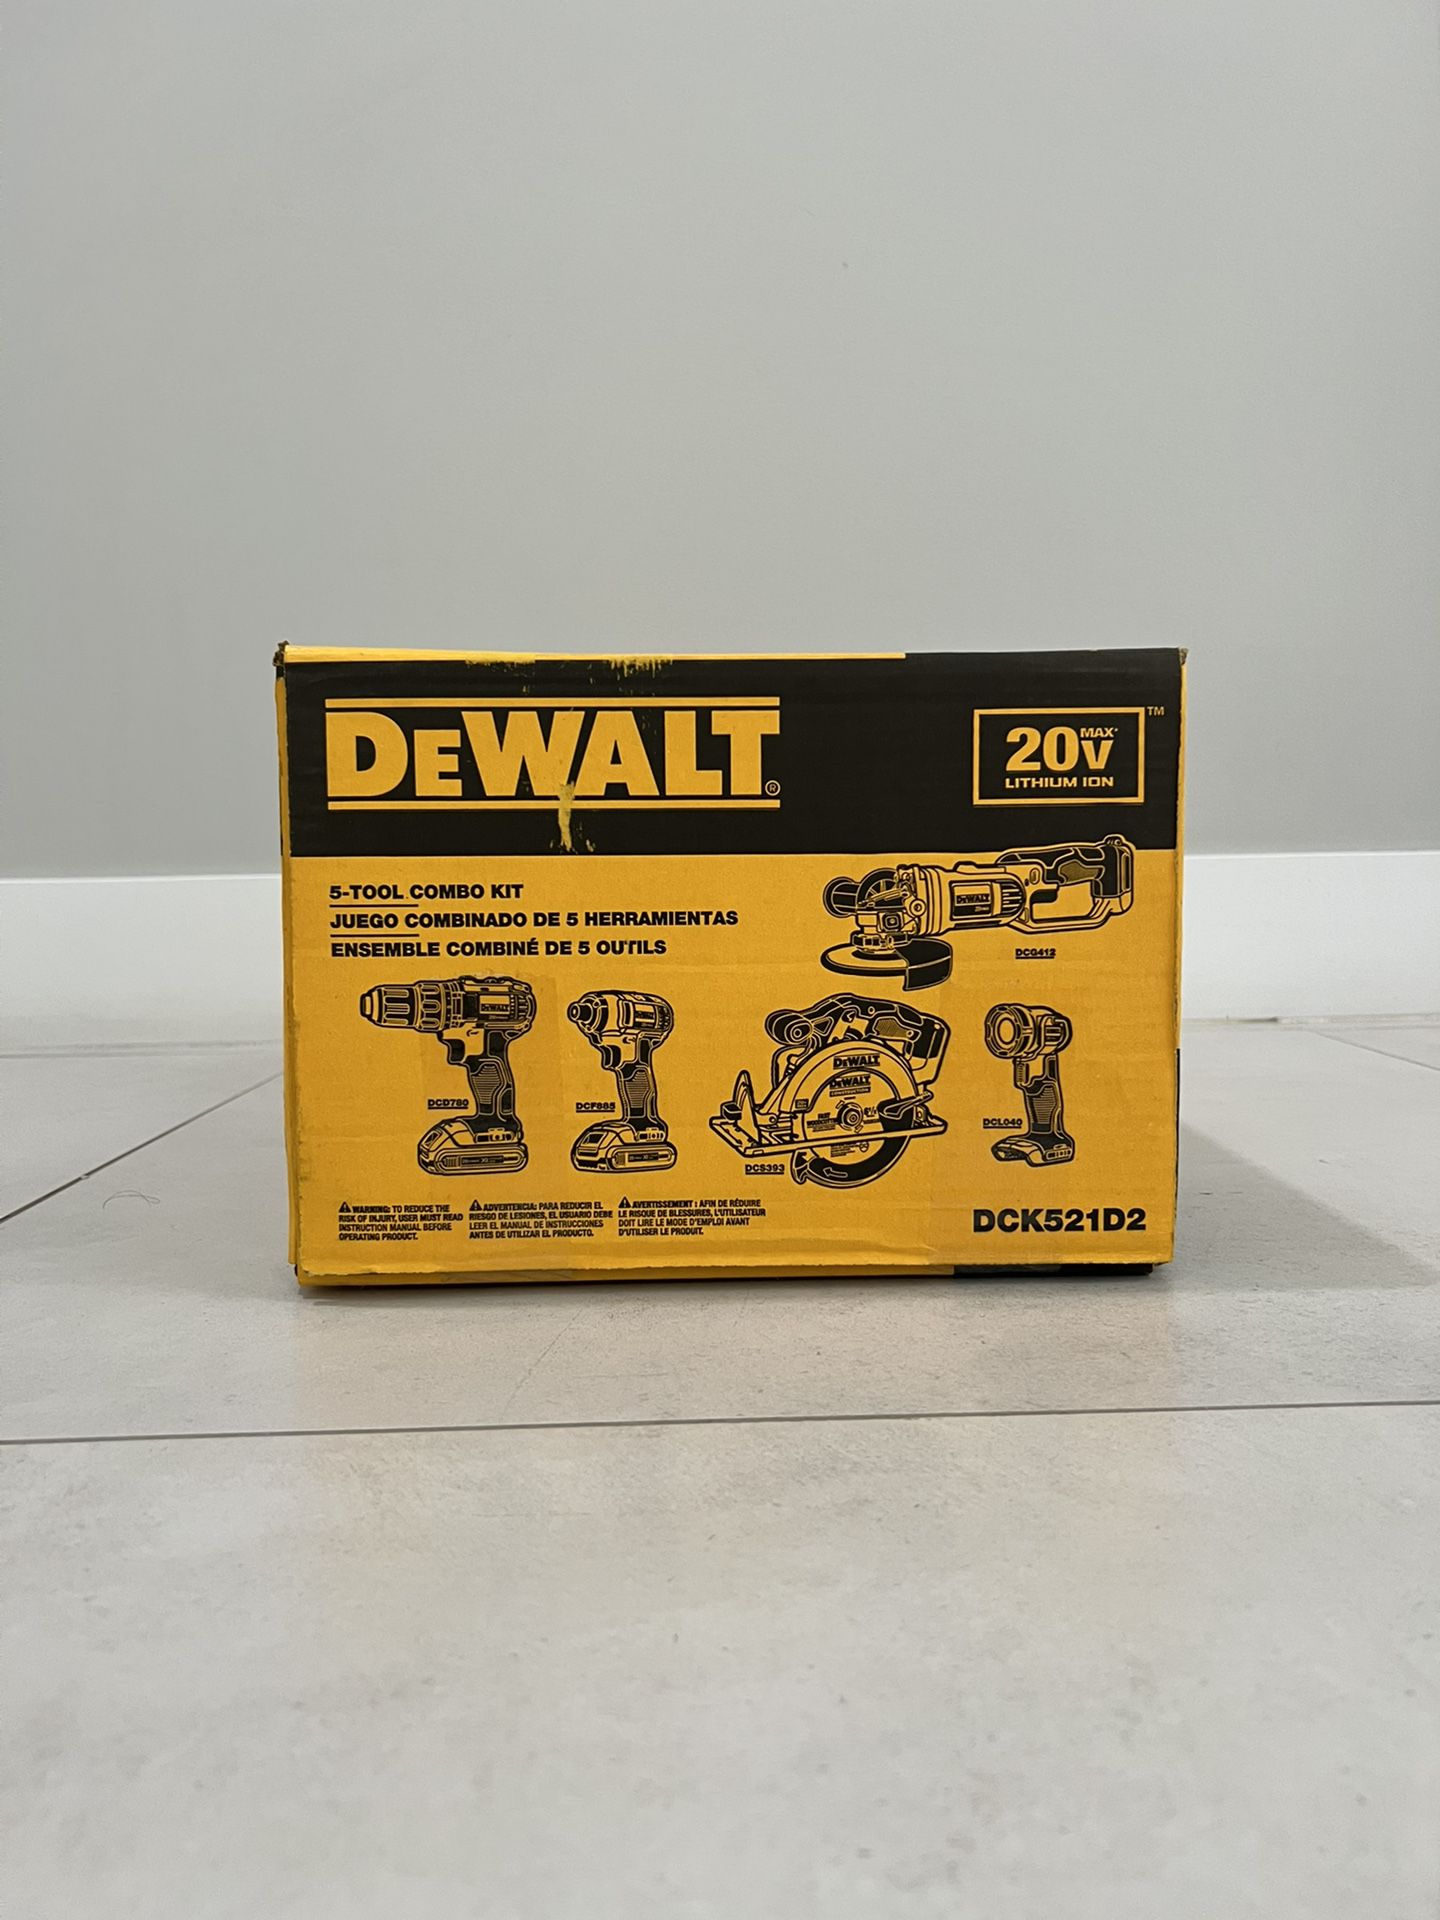 DEWALT 20-Volt MAX Cordless Combo Kit (5-Tool) with (2) 20-Volt 2.0Ah  Batteries  Charger for Sale in Medley, FL OfferUp